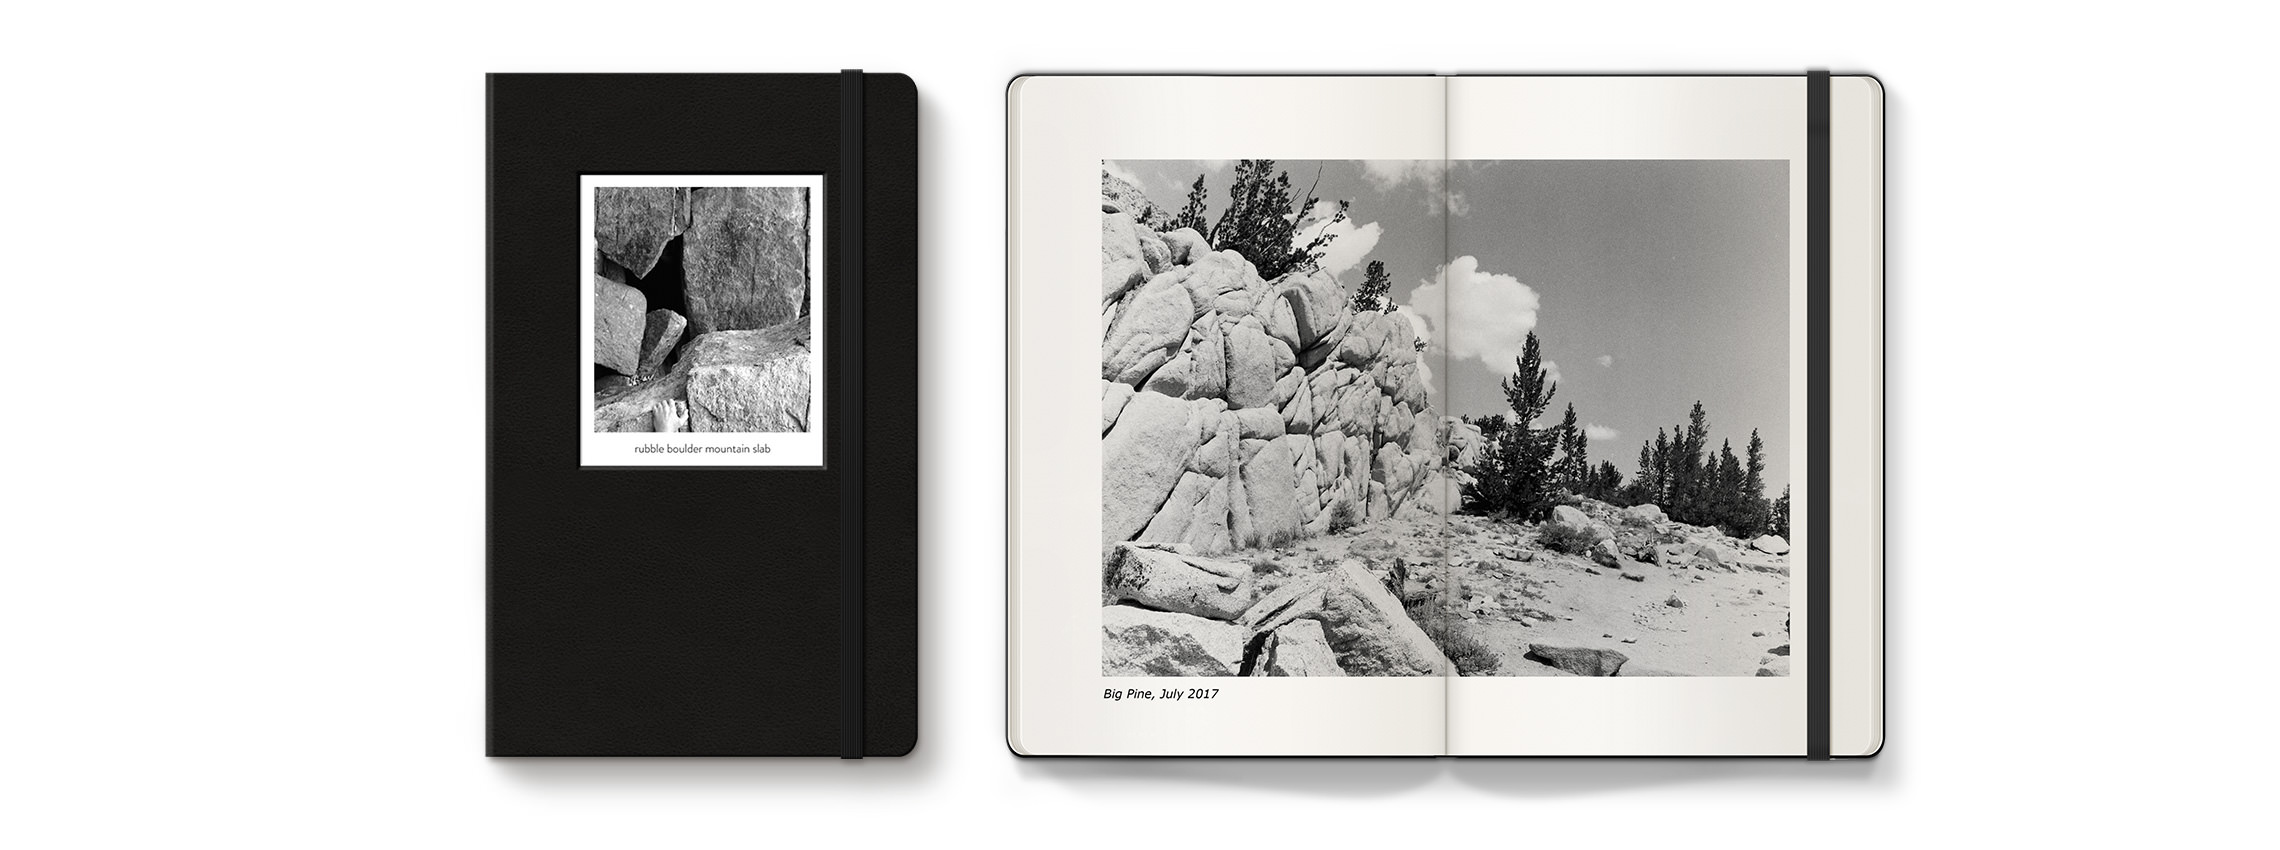 Moleskine Photo Book with black and white images of a rocky landscape.